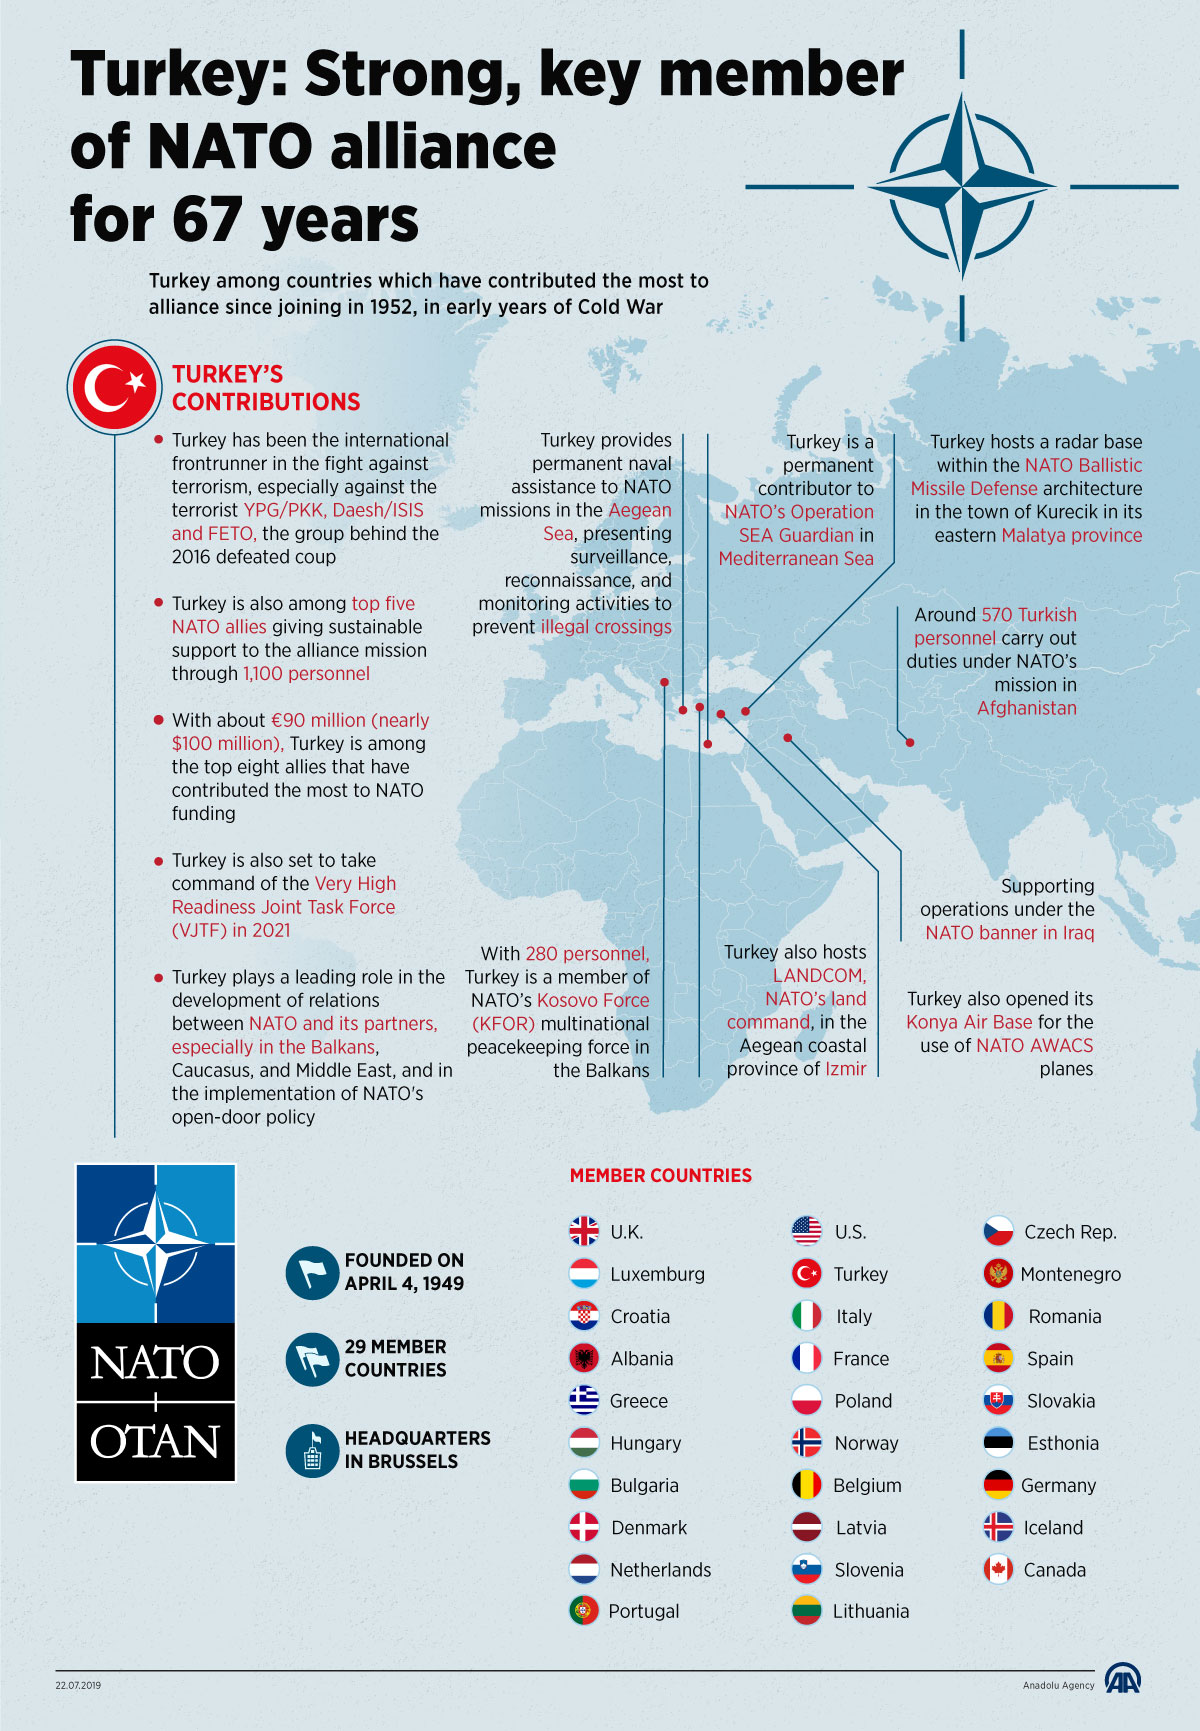 Turkey: Strong, key member of NATO alliance for 67 years